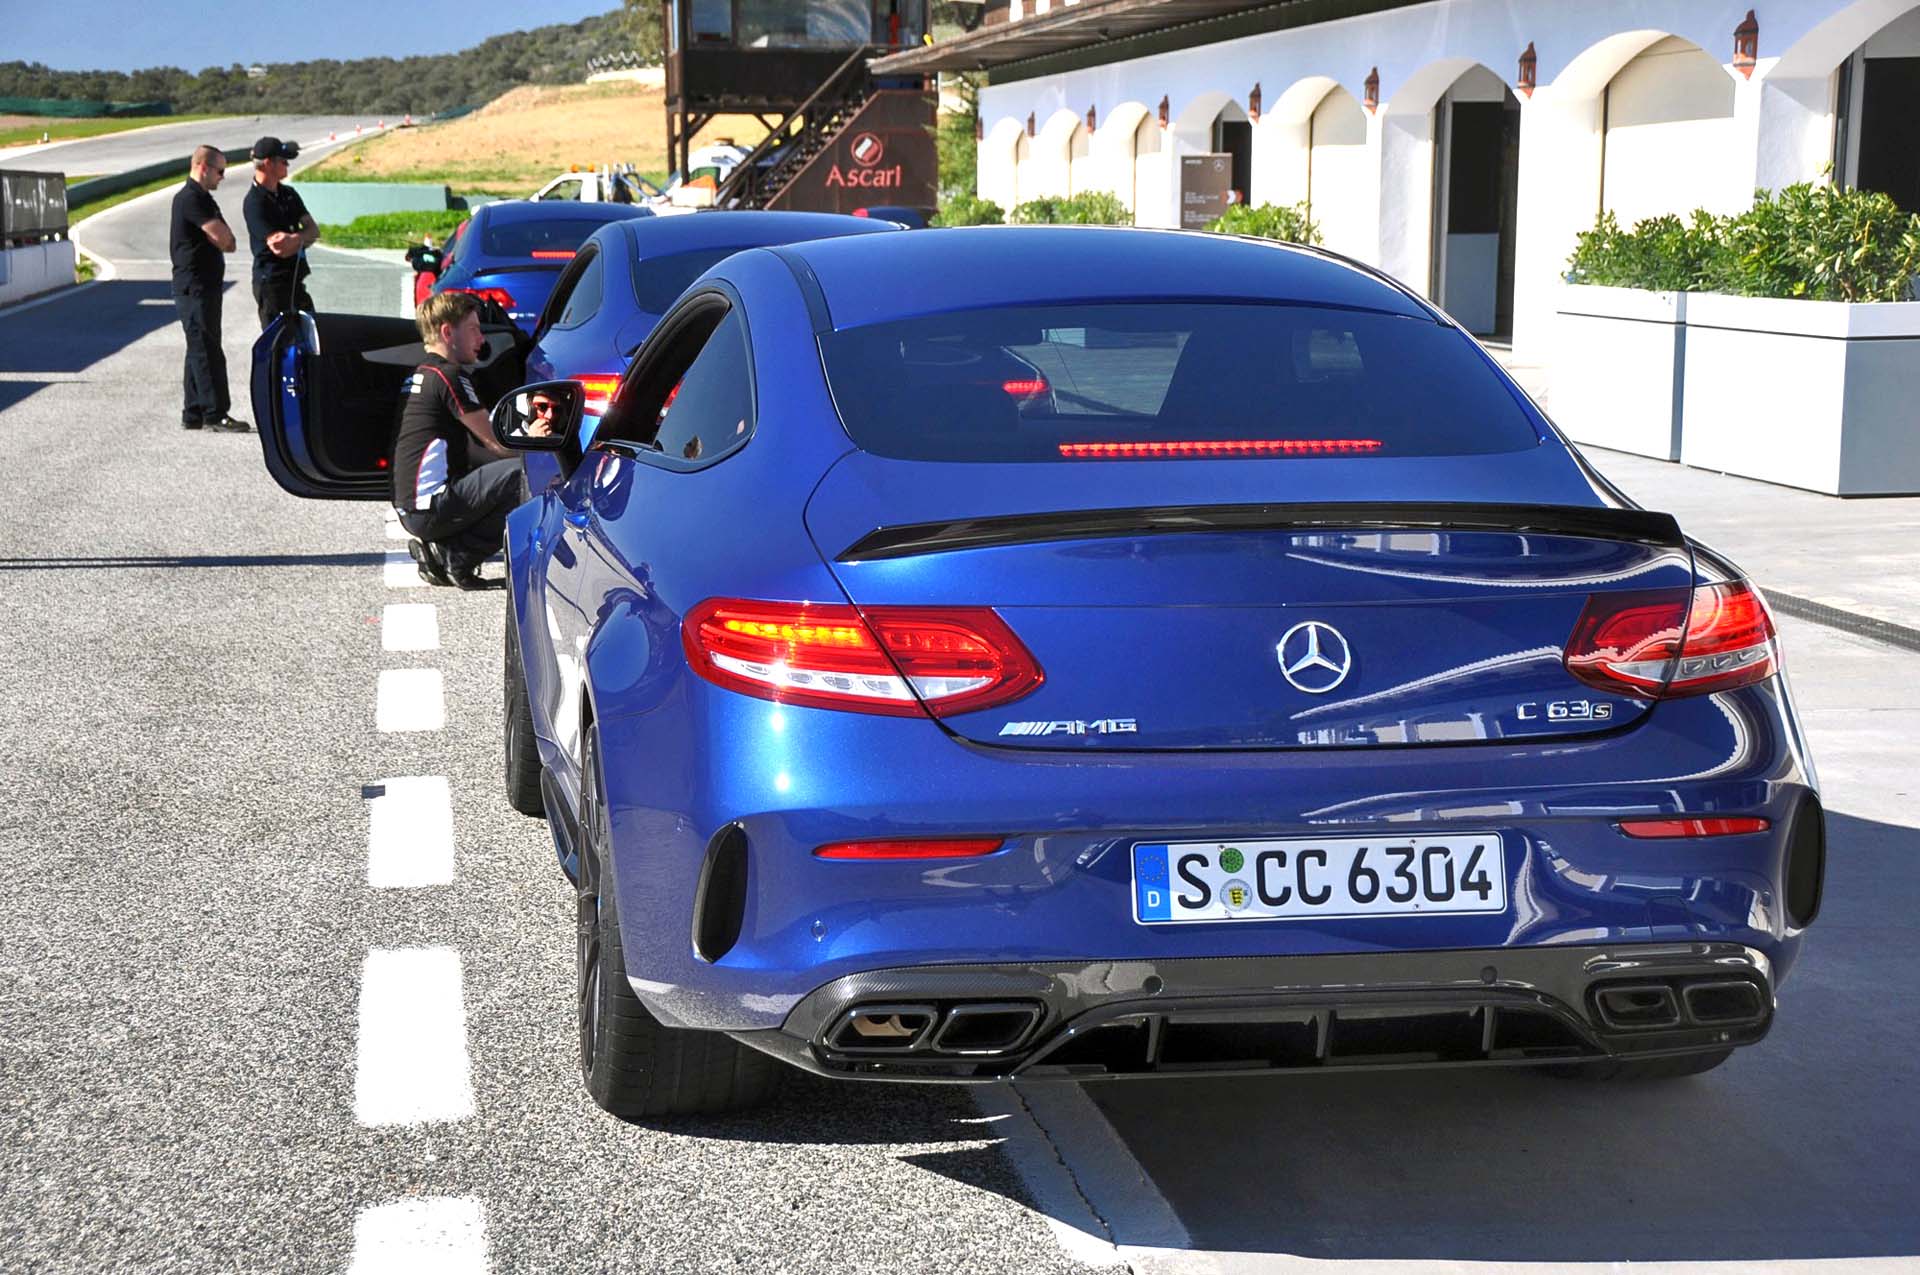 After the C 300 come the enthusiast models, the 2017 Mercedes-AMG C 63 and C 63 S. They brought these to Spain as well, strapped us in and put us on a track so we could fully appreciate the formidable performance of these cars.